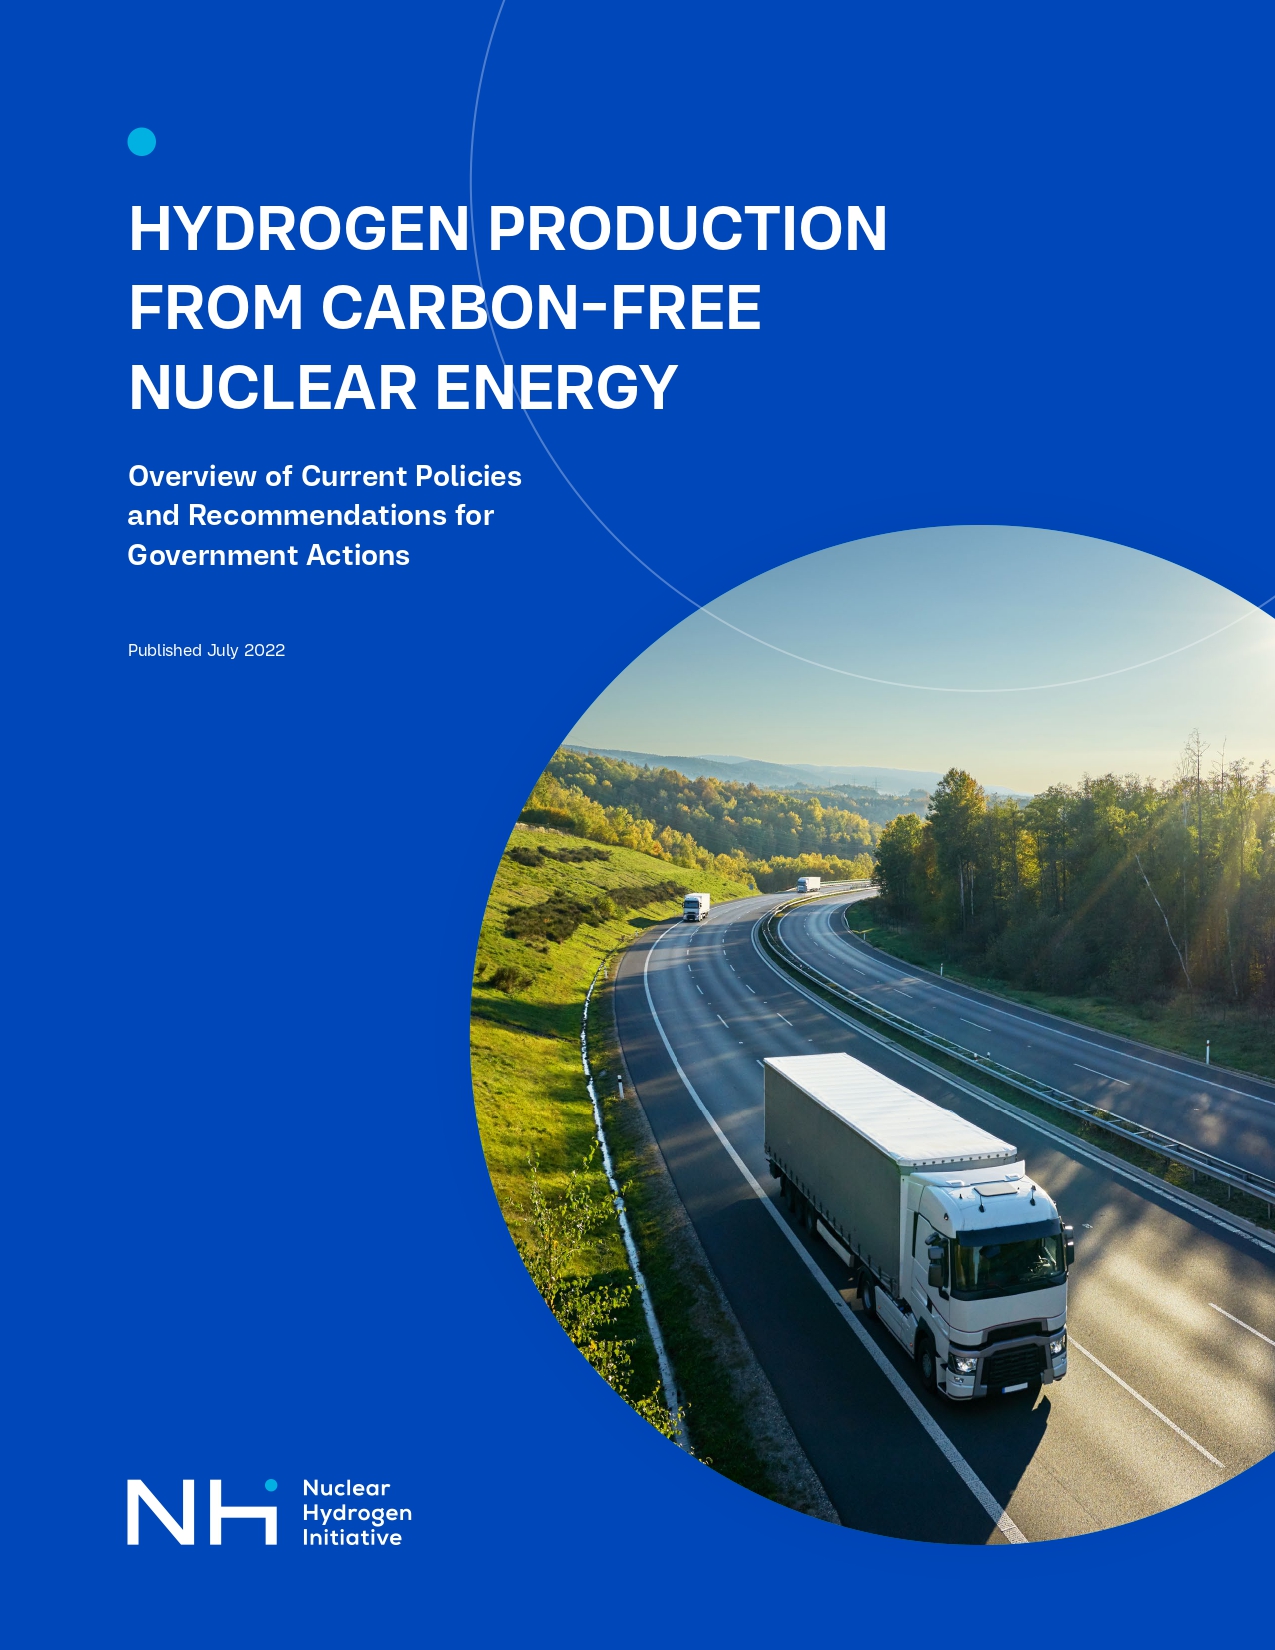 https://img.saurenergy.com/2022/07/hydrogen-production-from-carbon-free-nuclear-energy_page-0001.jpg